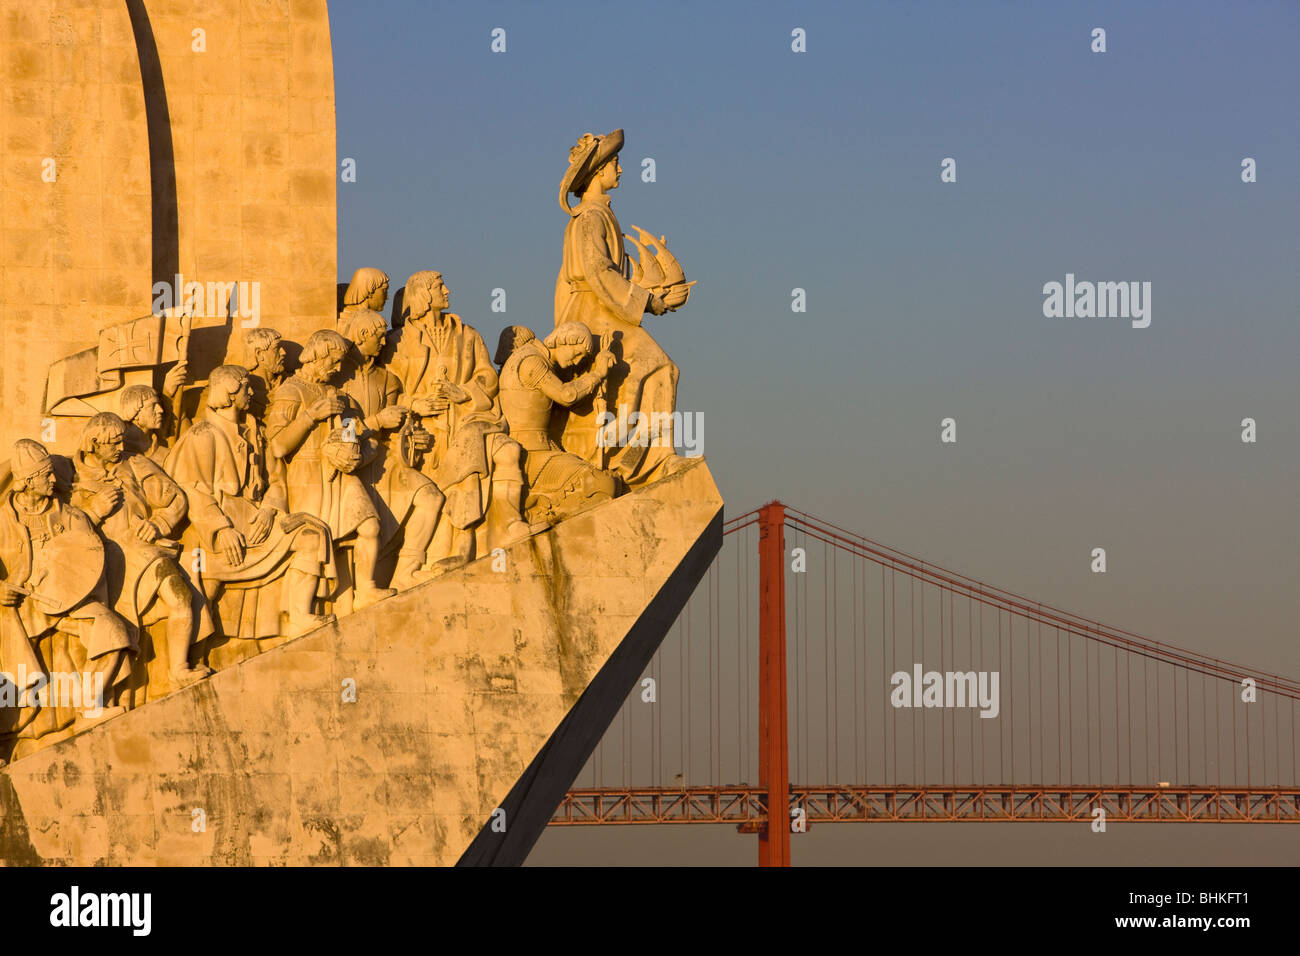 Portugal Lisbon Monument to the discoveries and suspension bridge in late evening light. Stock Photo